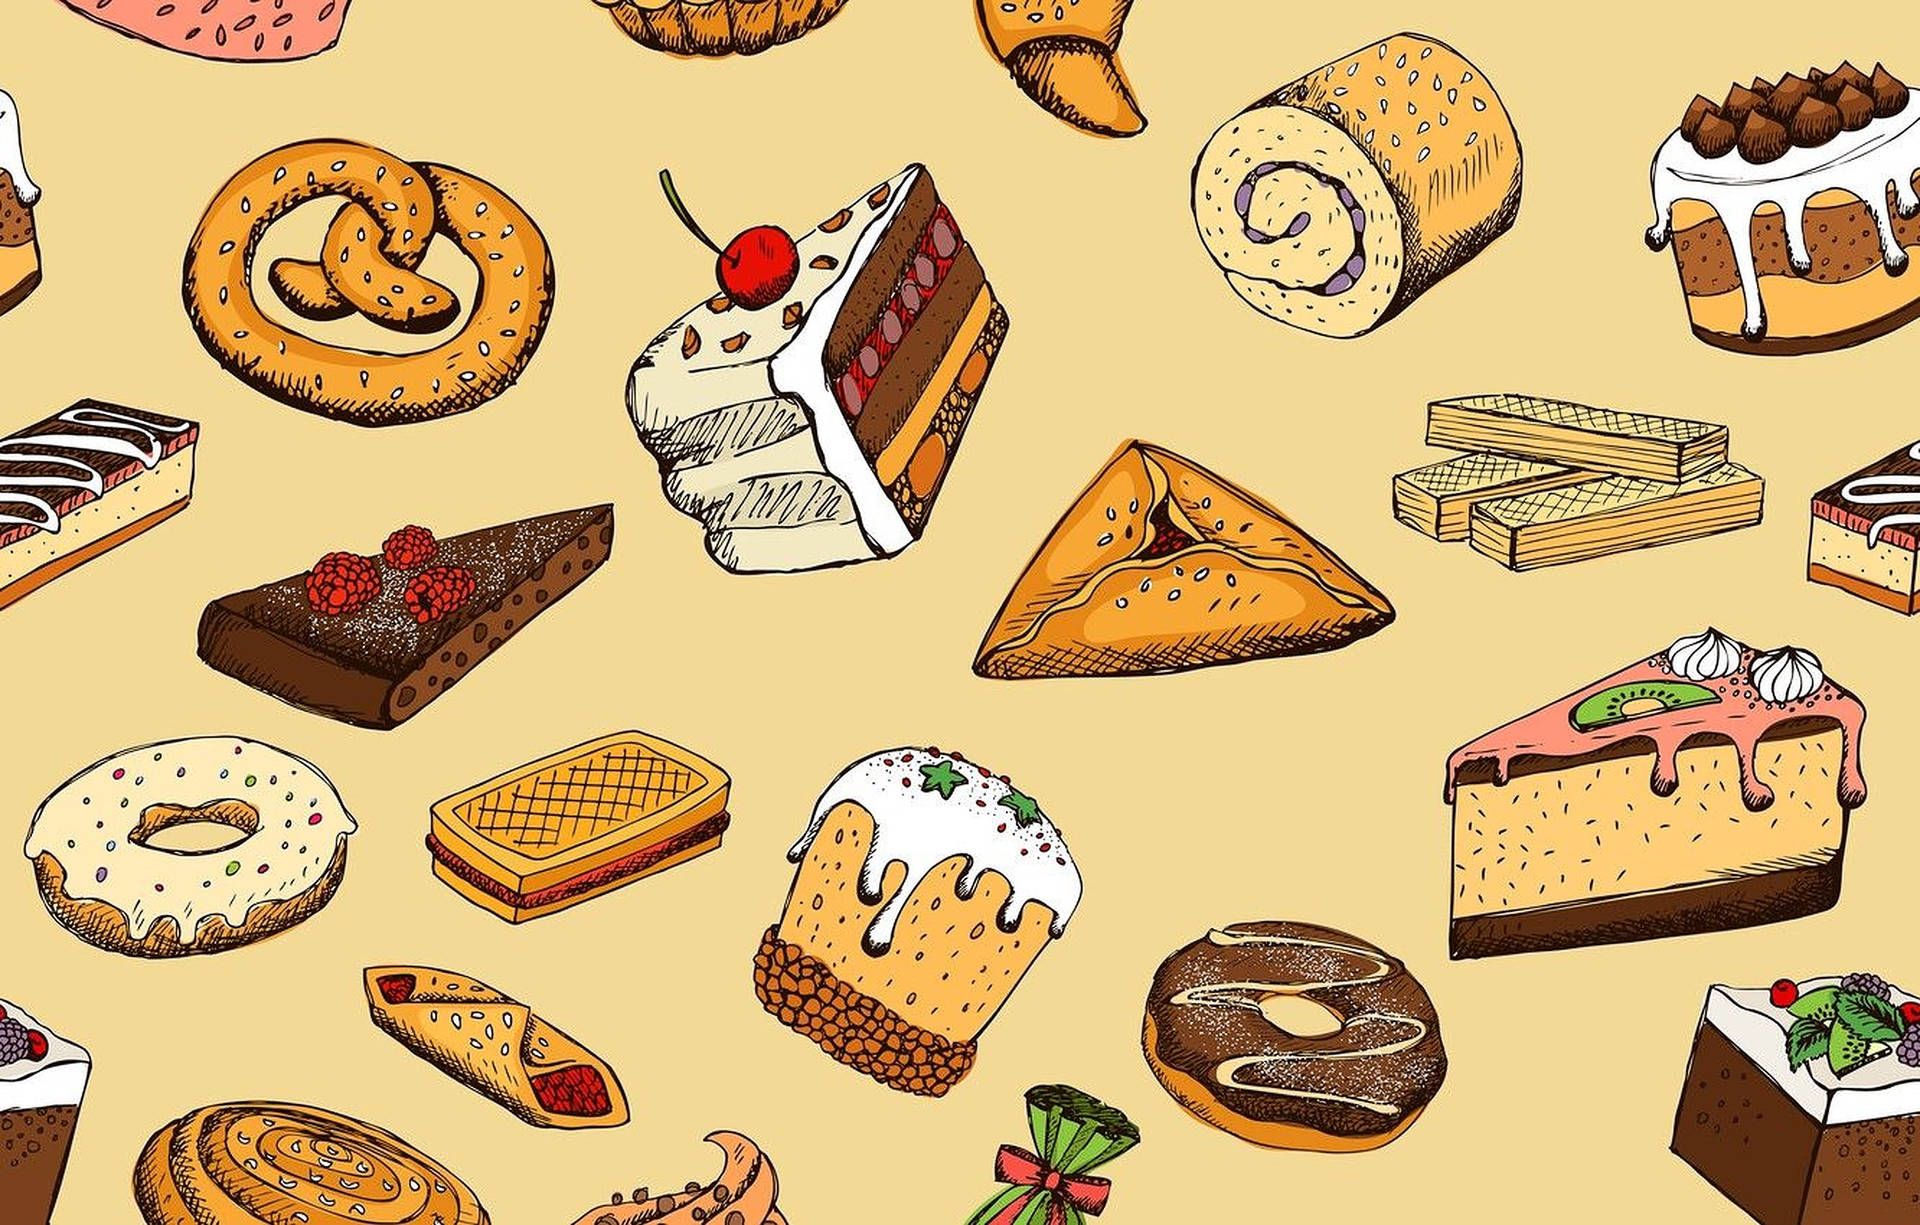 A pattern of various desserts including cakes, donuts, and pies. - Bakery